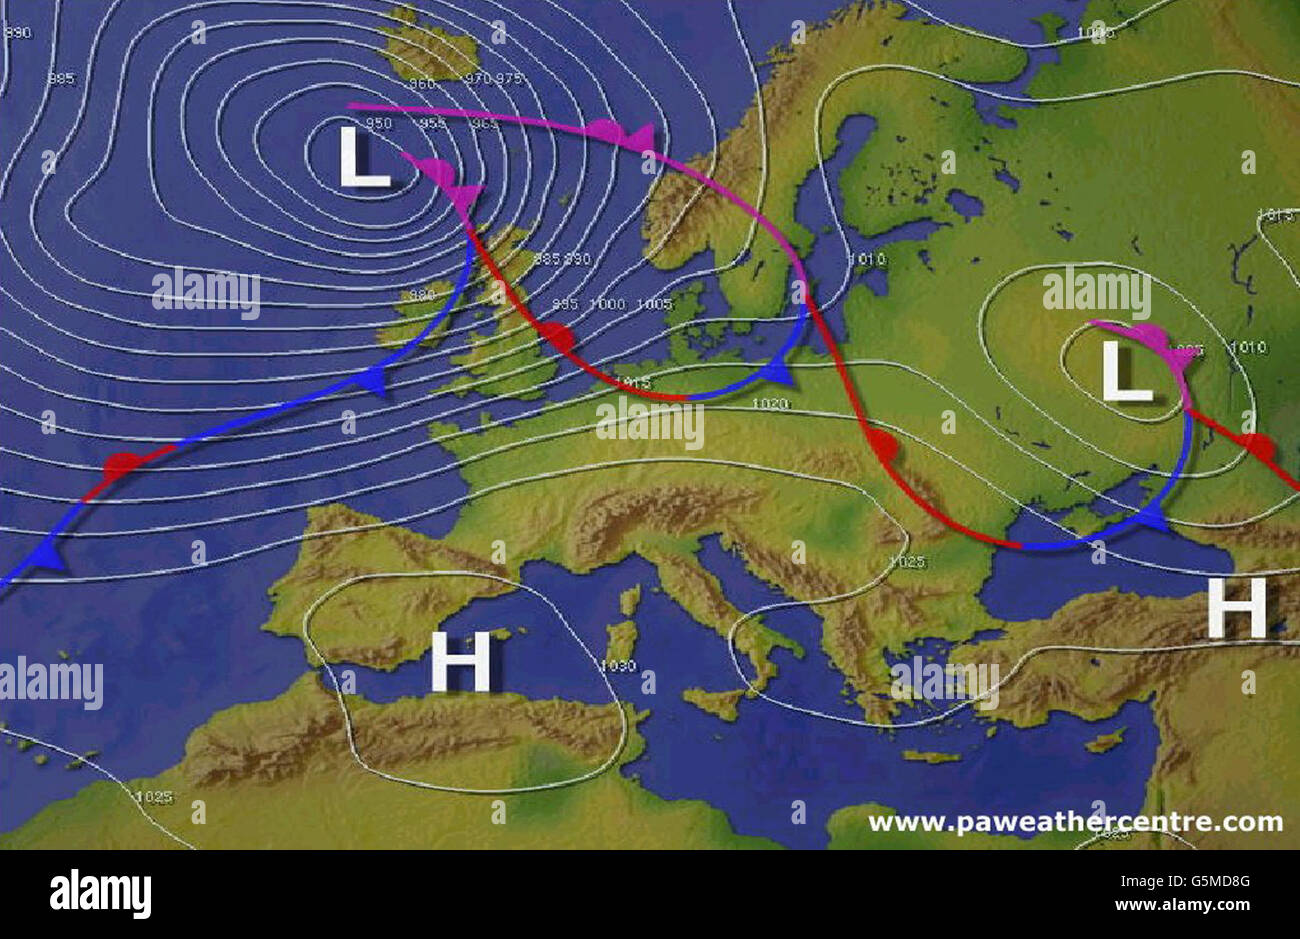 A PA Weather Centre pressure chart released, of the forecast for midday tomorrow, as Britain prepares itself for another wave of severe gales. Weather forecasters predict gusts of 80mph will affect some parts of the country. * . .. although they do not expect conditions to be as severe as Monday's violent storms. Stock Photo